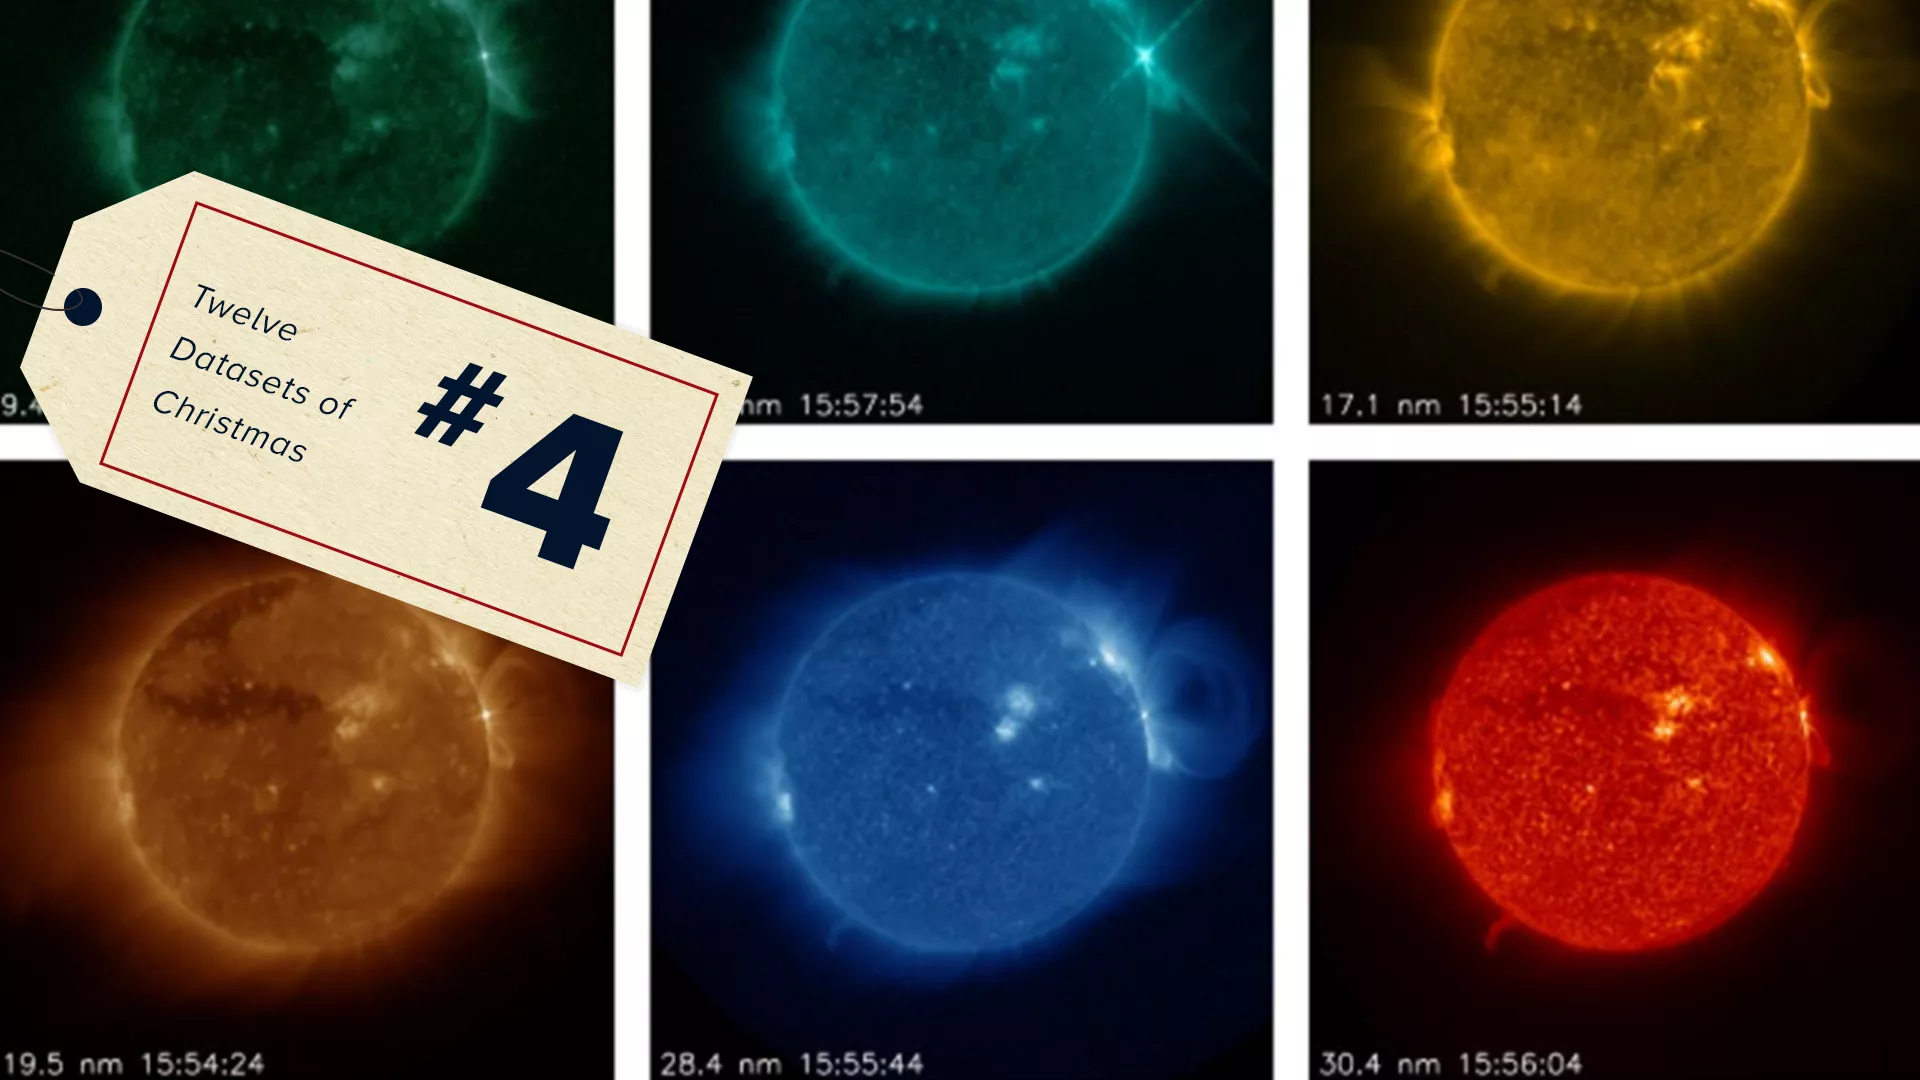 Imagery of the six wavelengths that SUVI uses to visualize the Sun, with a #4 sticker for the 12 datasets of Christmas on top. 